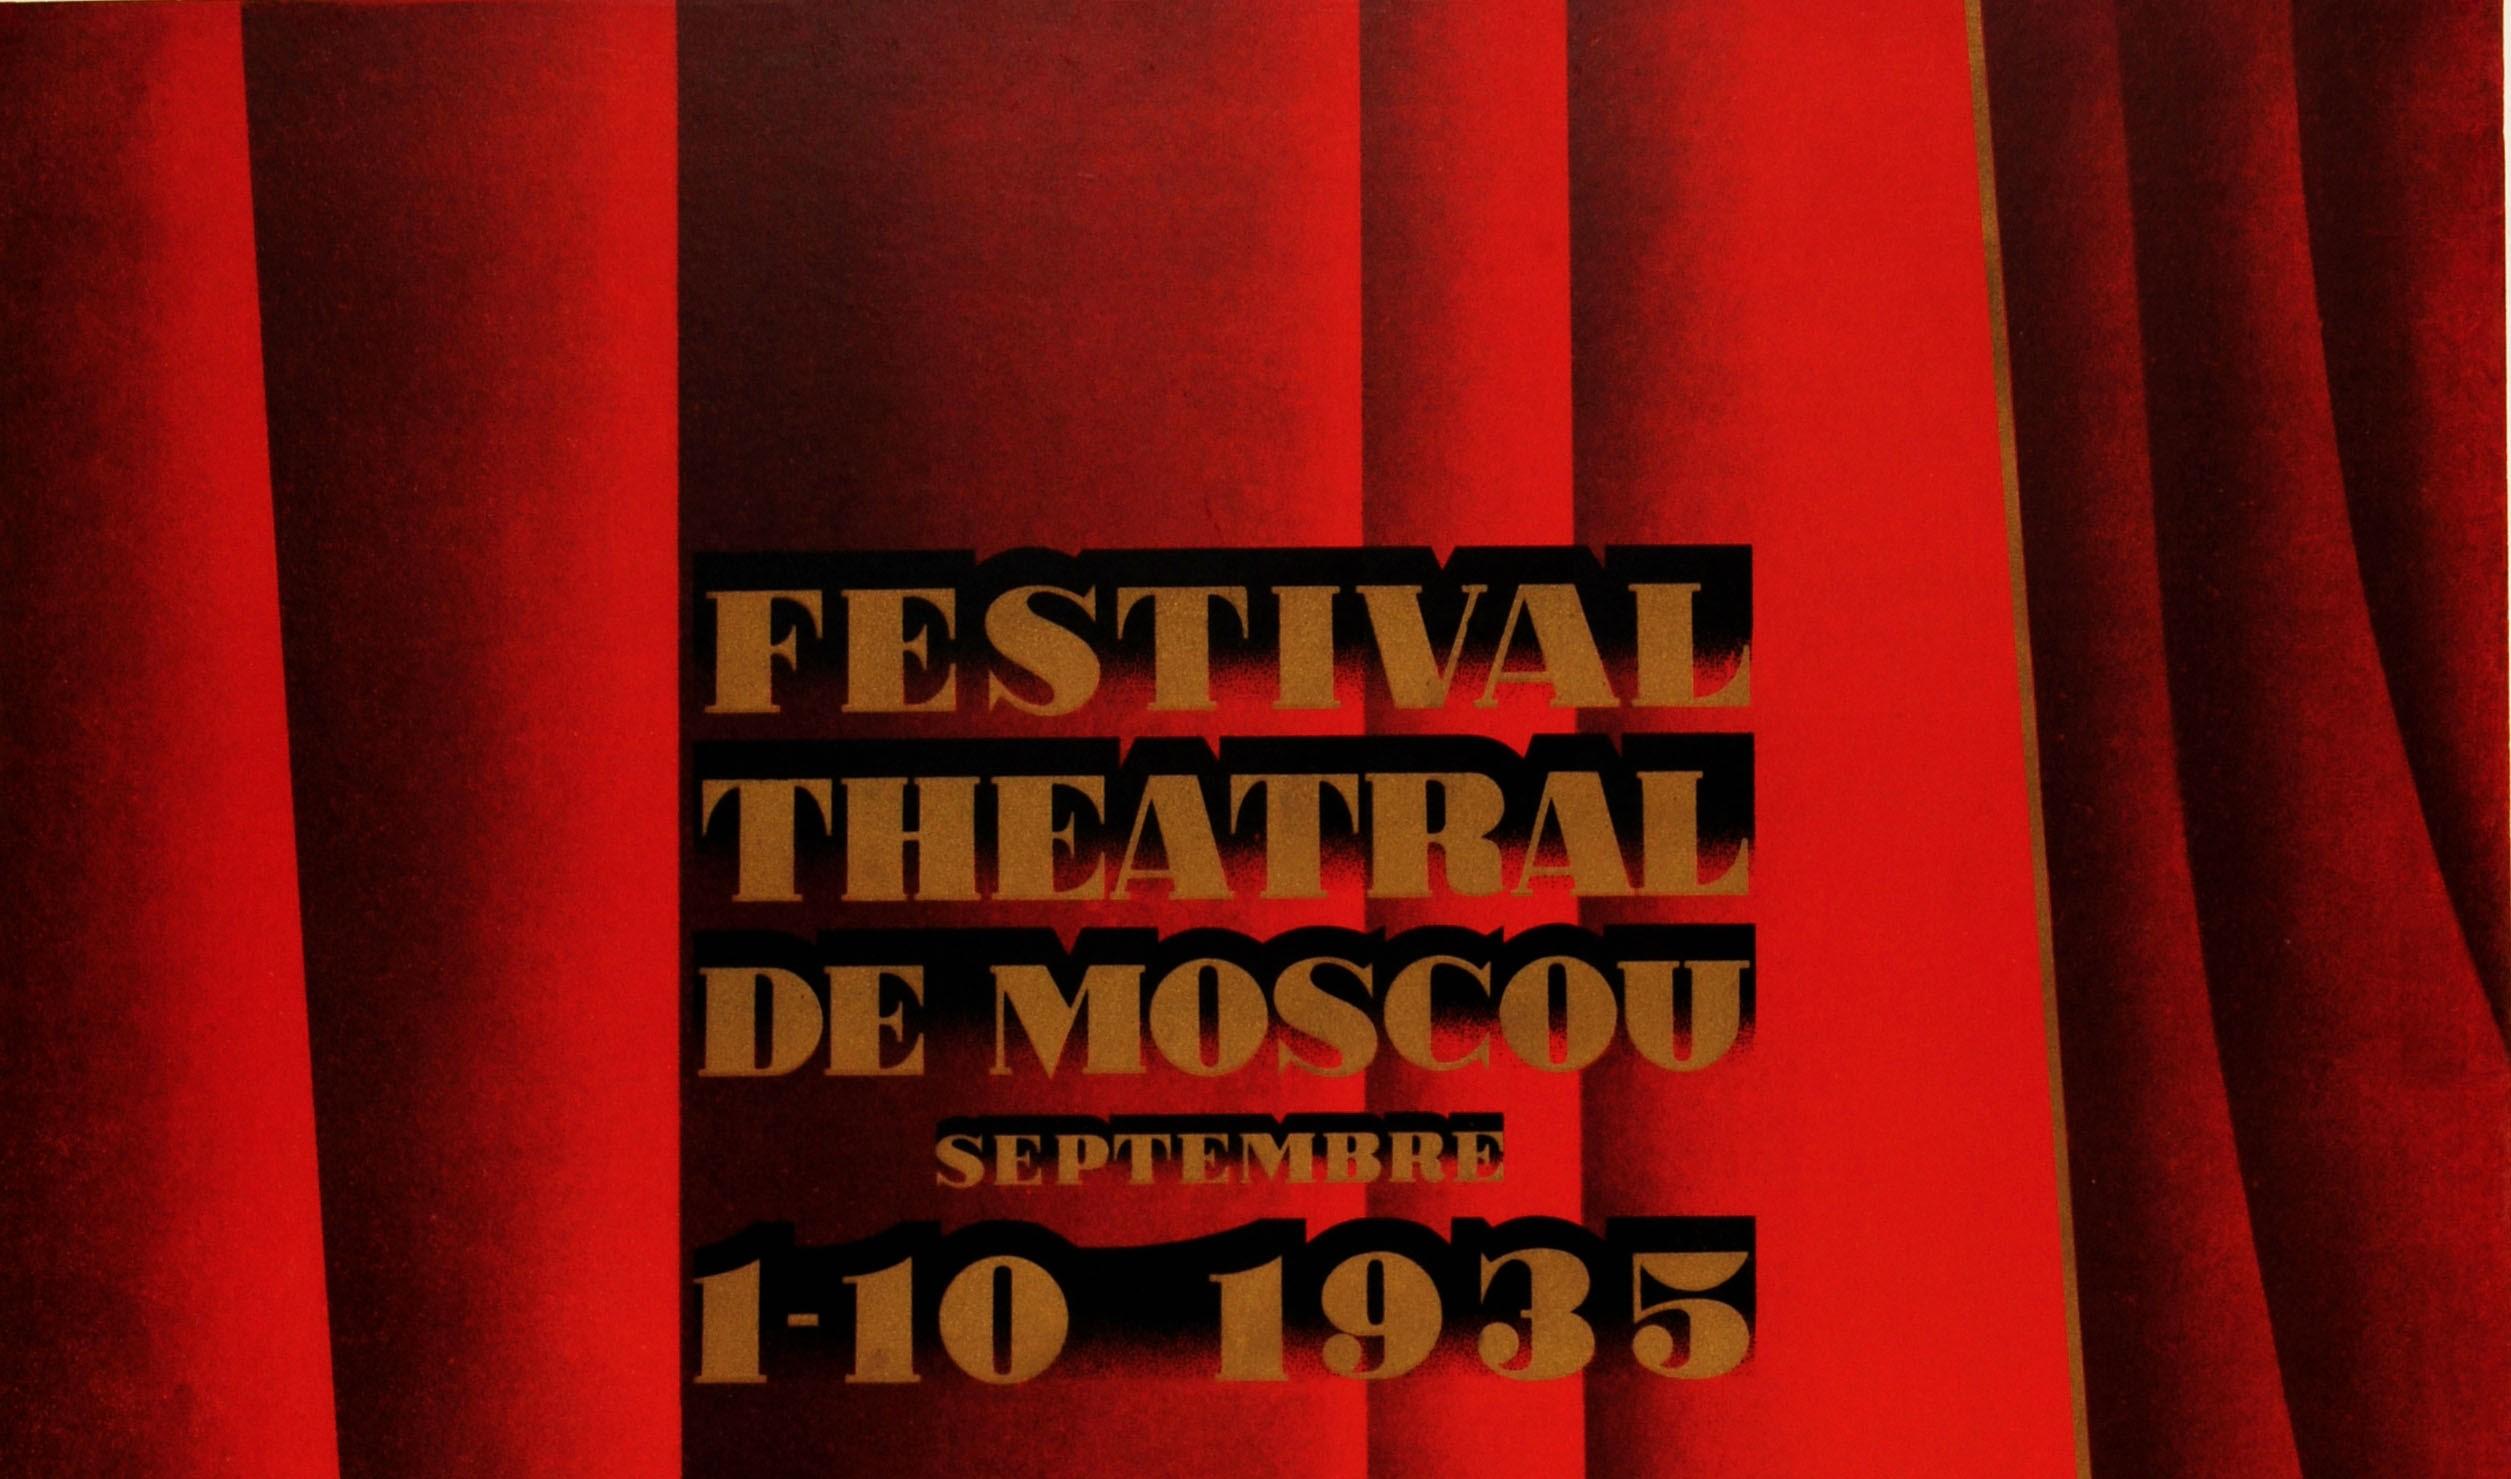 Original vintage travel poster to promote the Moscow Theatre Festival 1-10 September 1935, issued by the Soviet state travel company Intourist for display in travel agencies and USSR embassies in France and French speaking countries. Fantastic